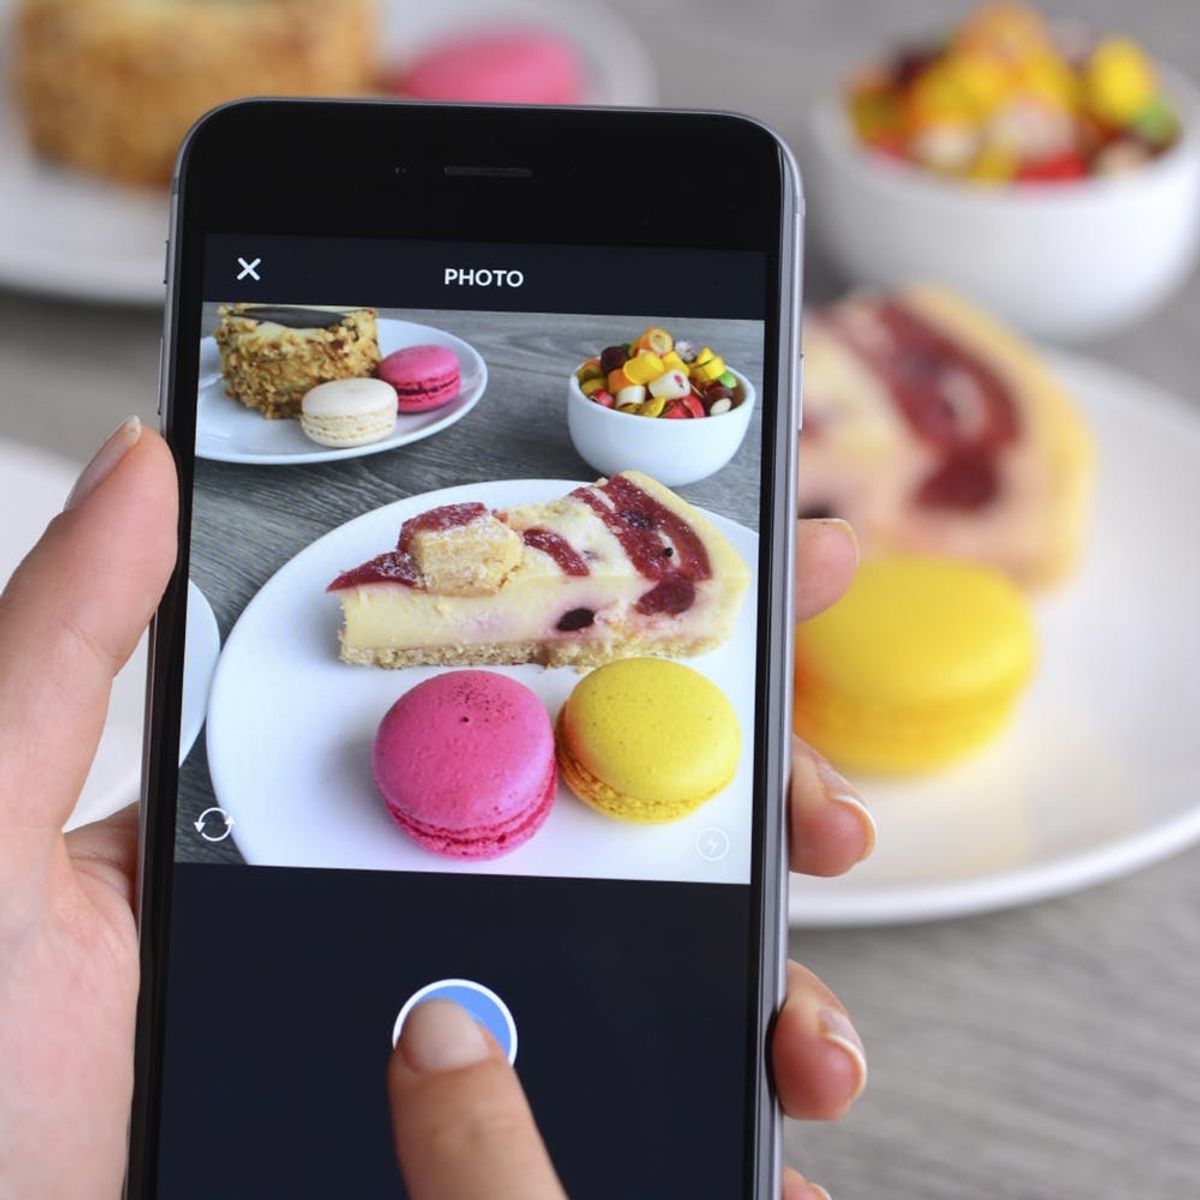 Here’s What You Need to Know About Instagram’s New Personalized Video Feed